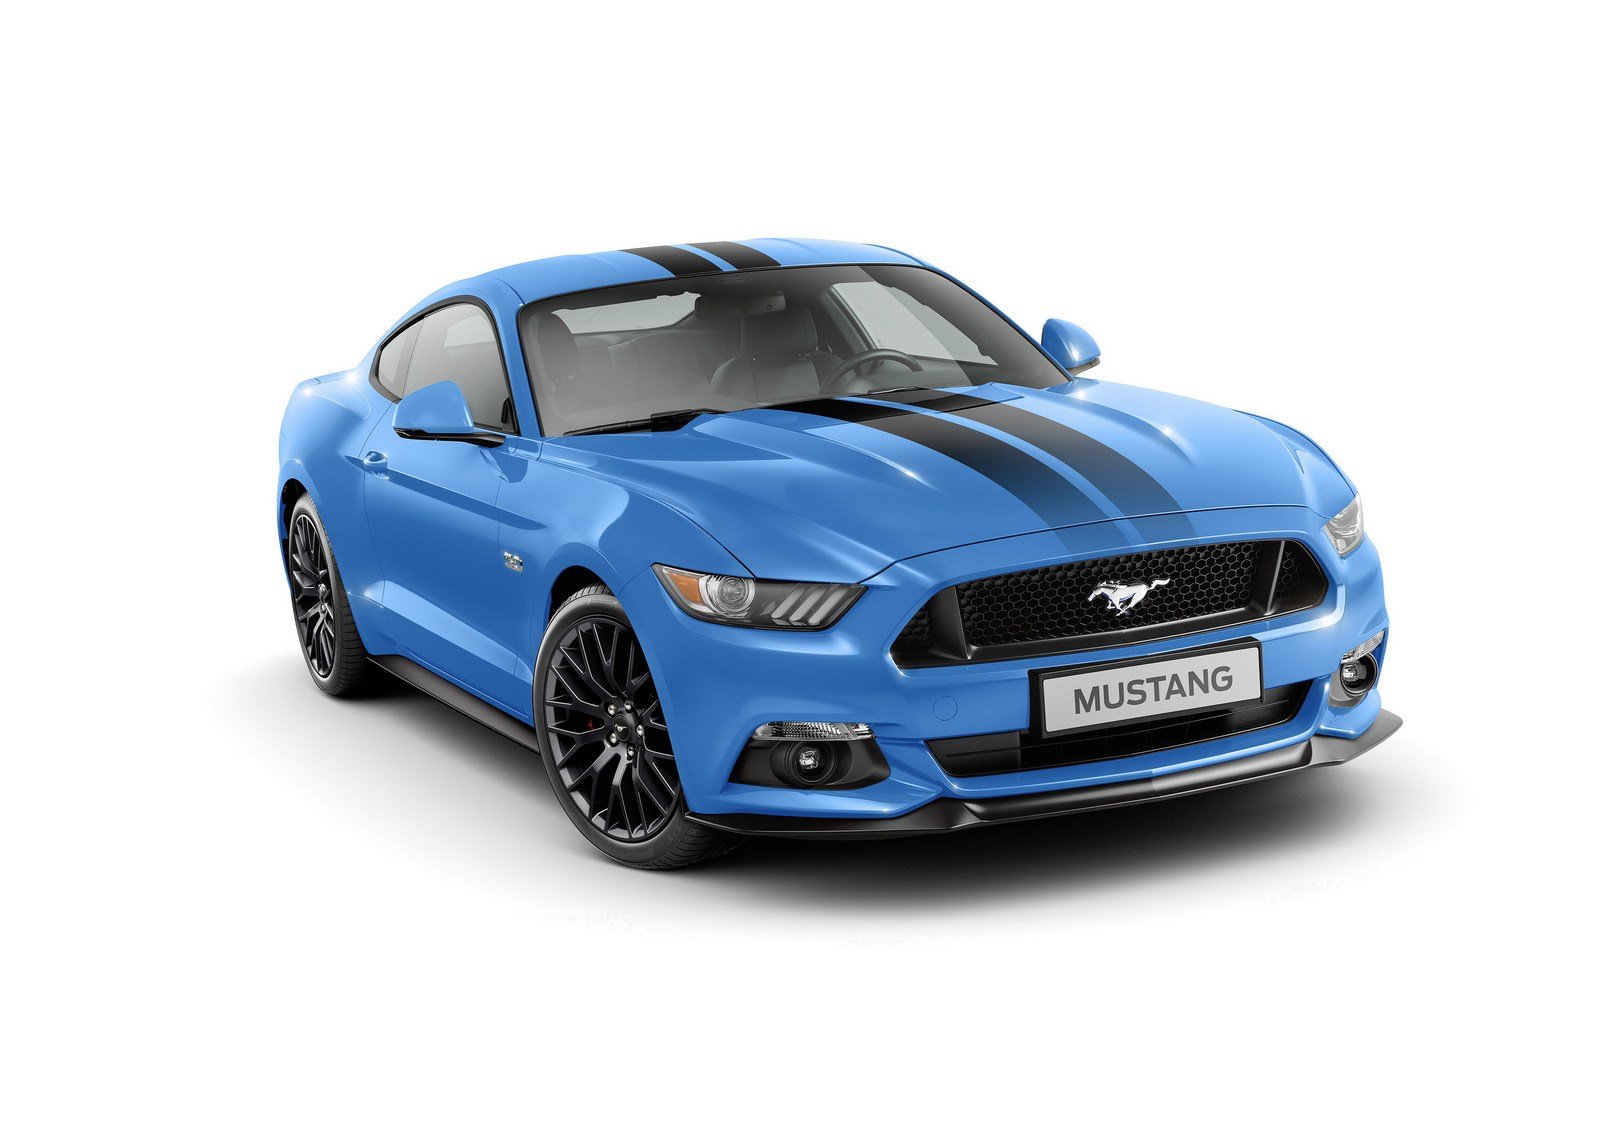 Mustang Of The Day: 2017 Ford Mustang Blue Edition